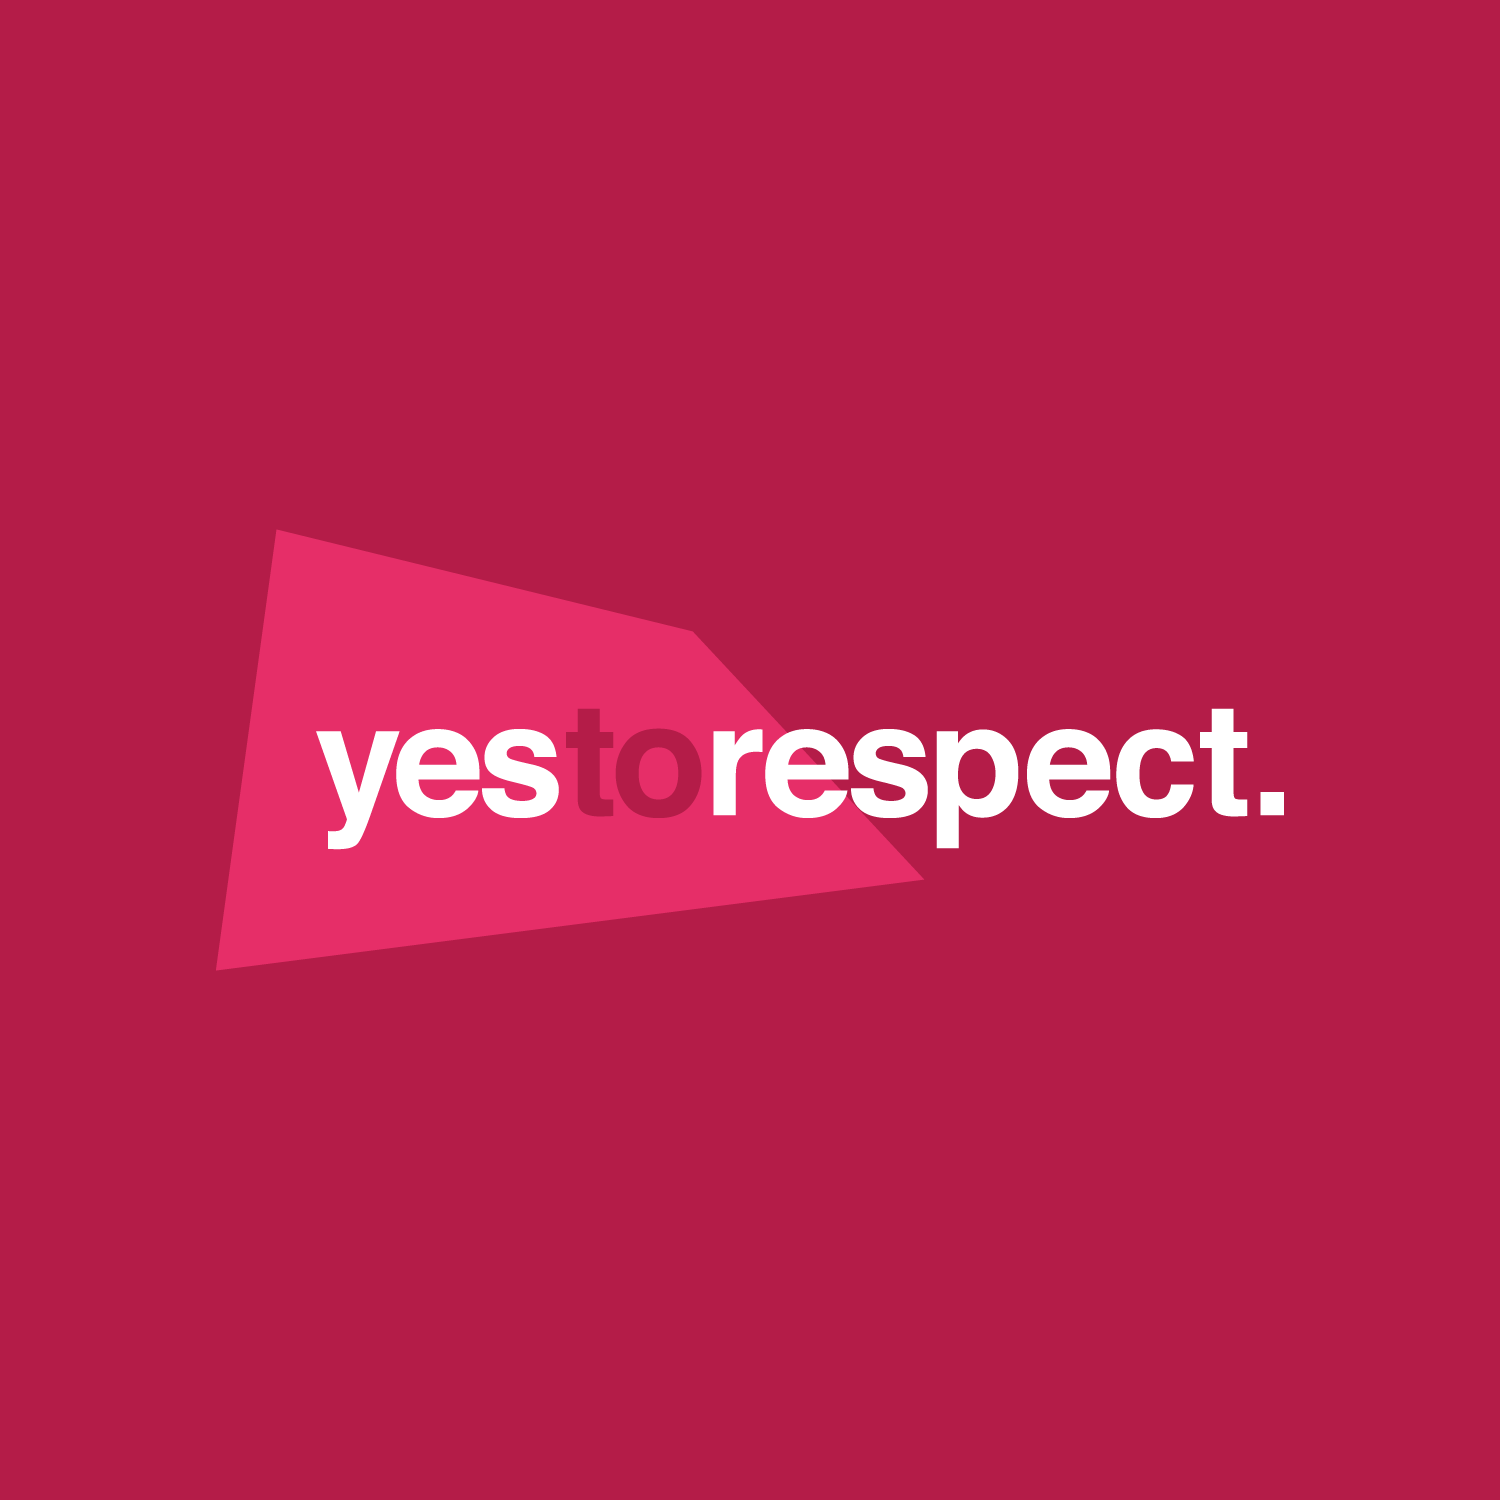 University of Central Lancashire yes to respect